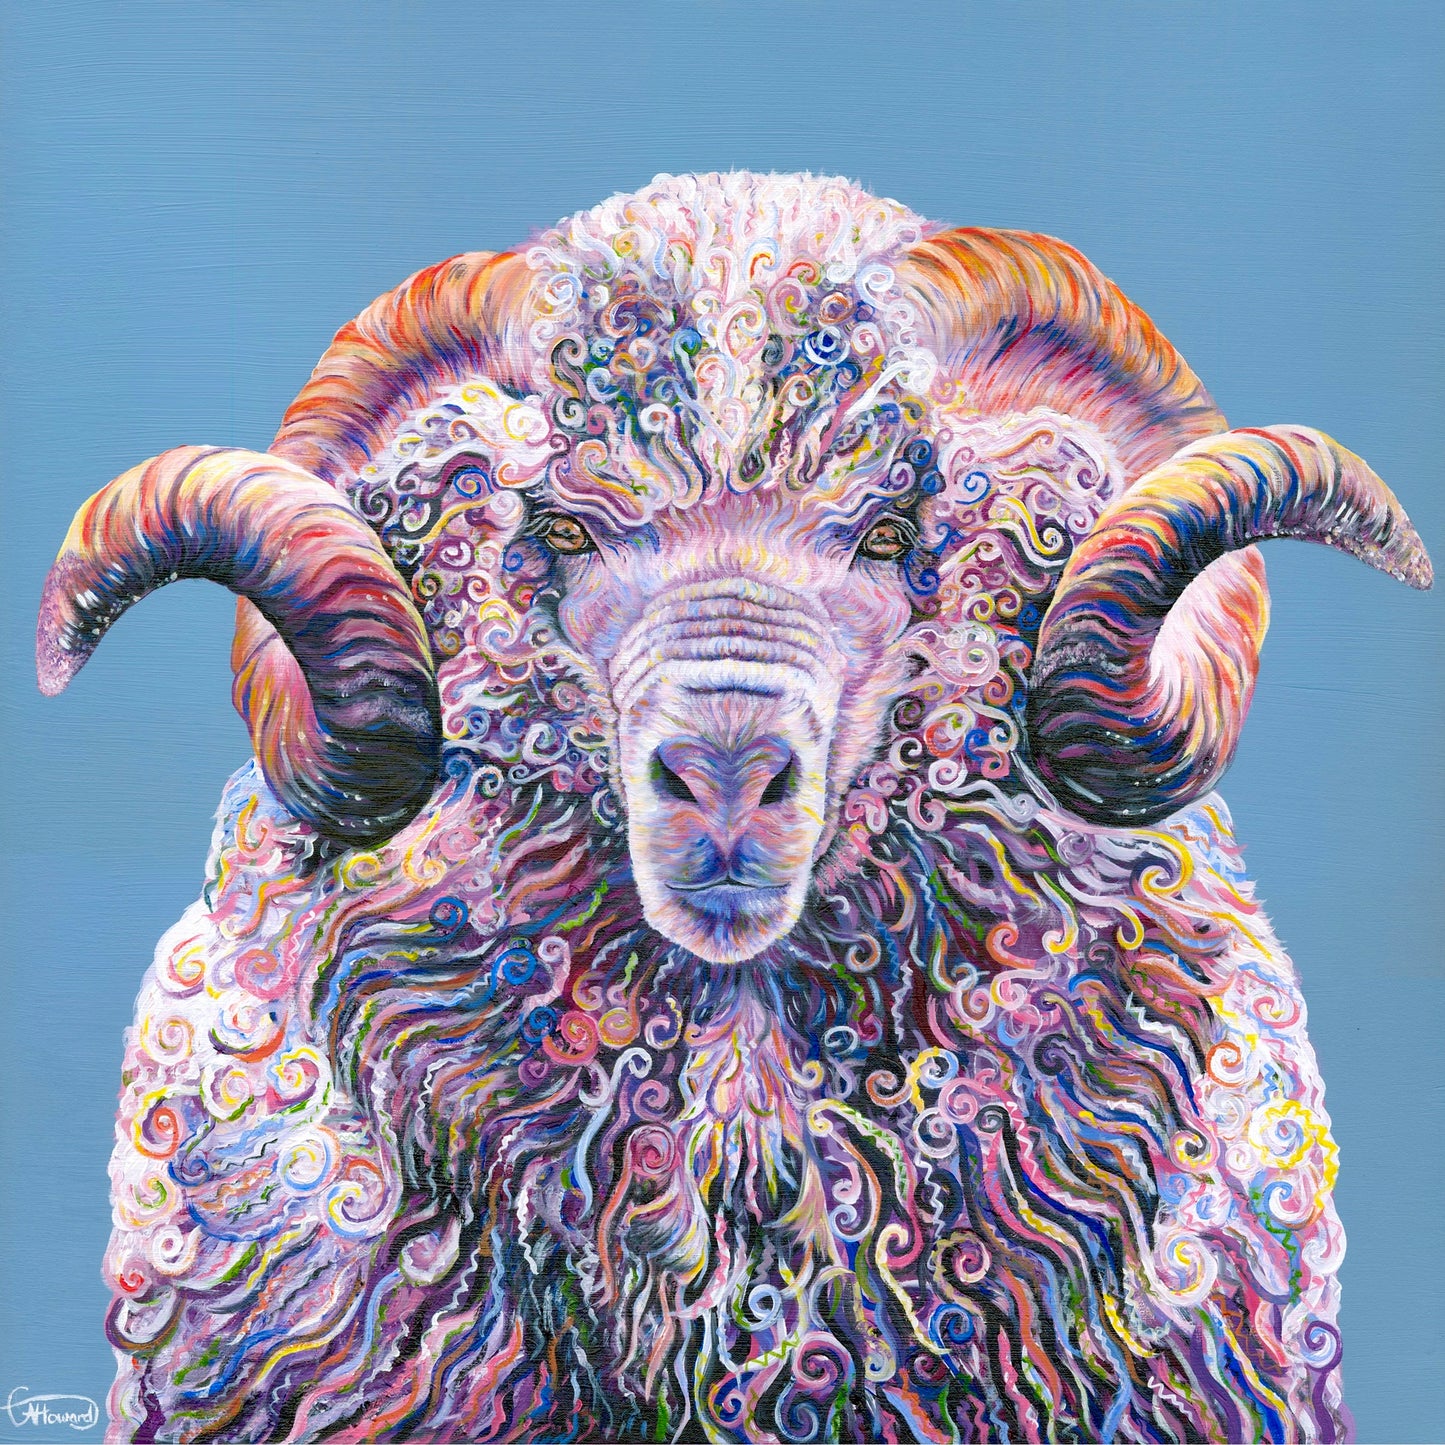 'Marvin the Merino Sheep' limited edition FRAMED giclée print